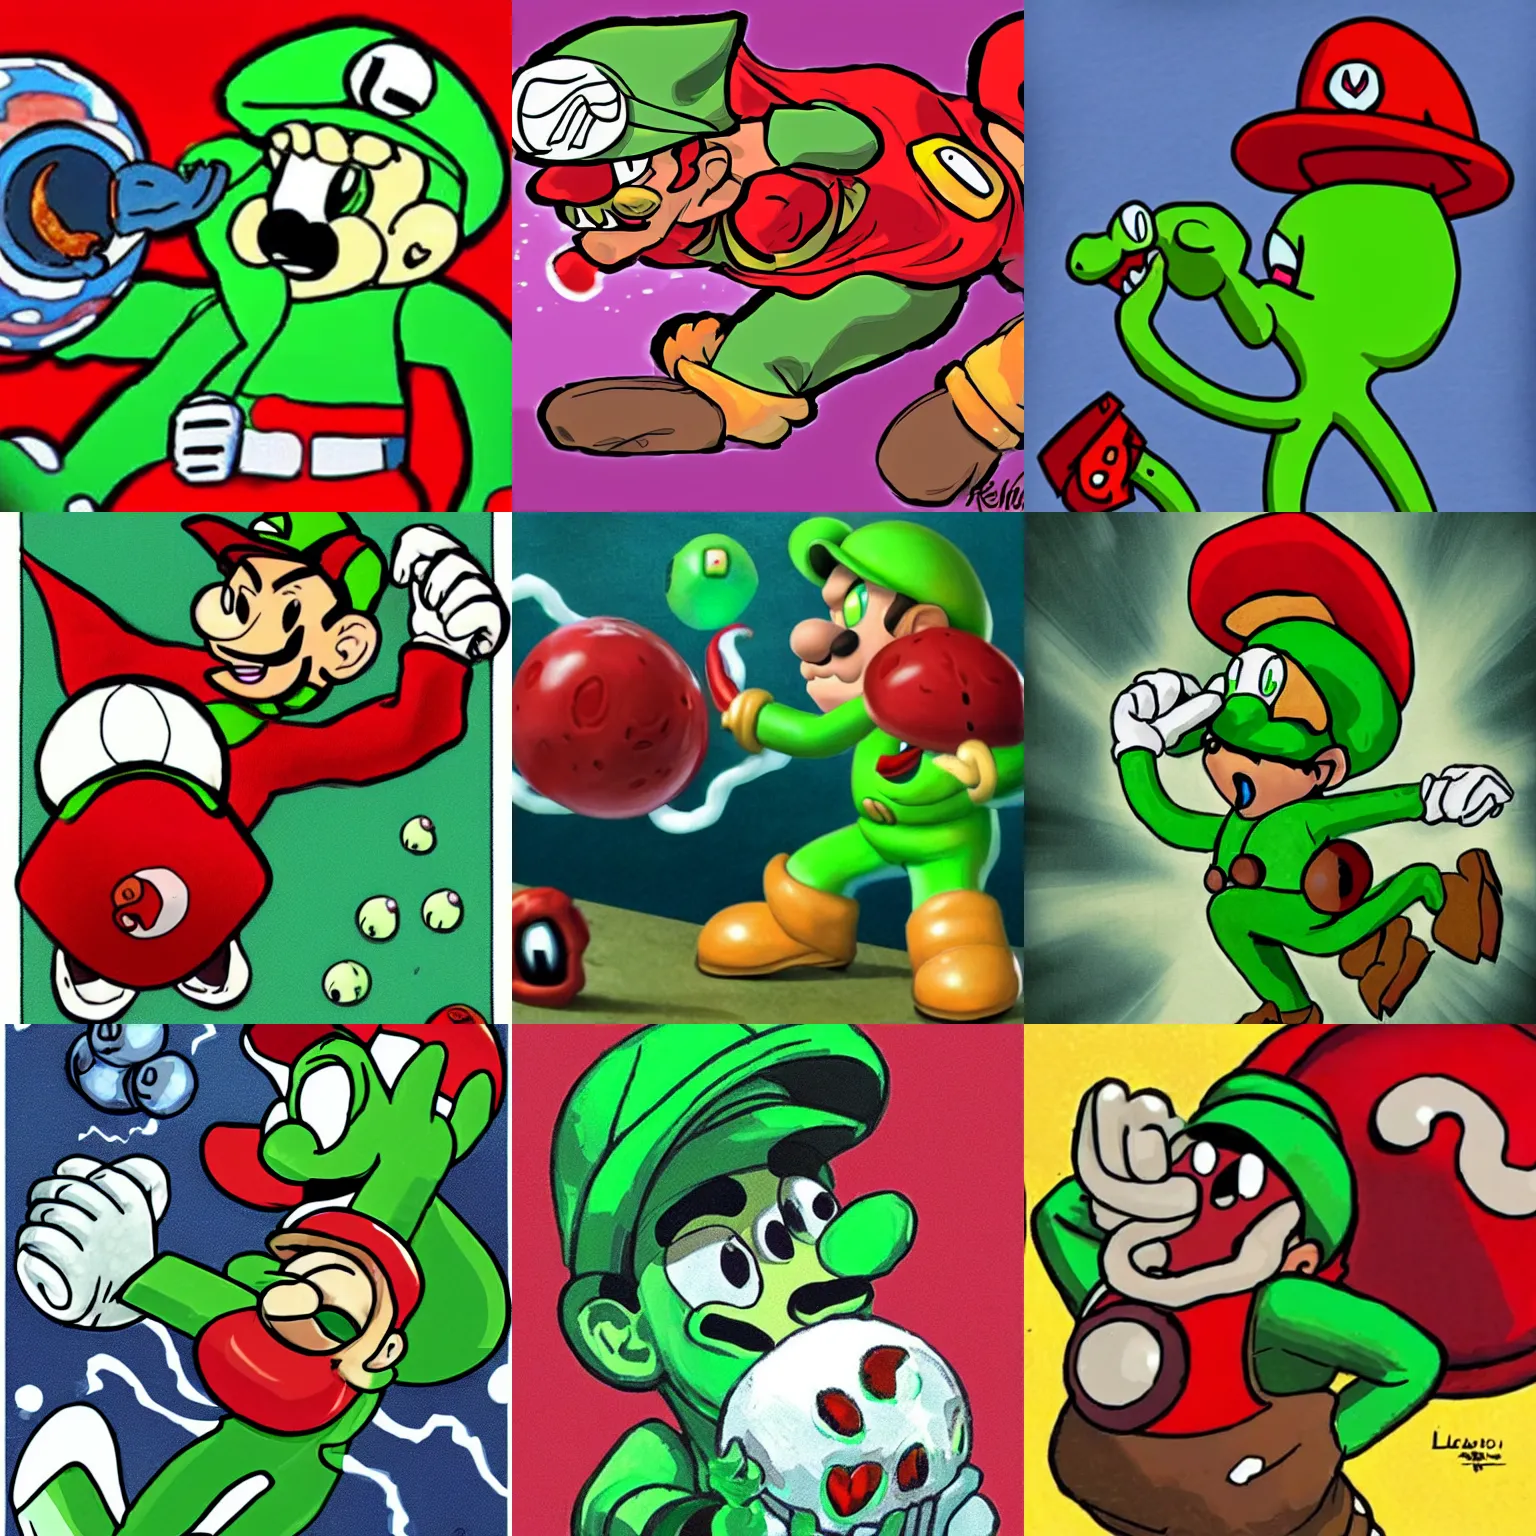 Prompt: lovecraftian horror cthulu throwing red shells at luigi